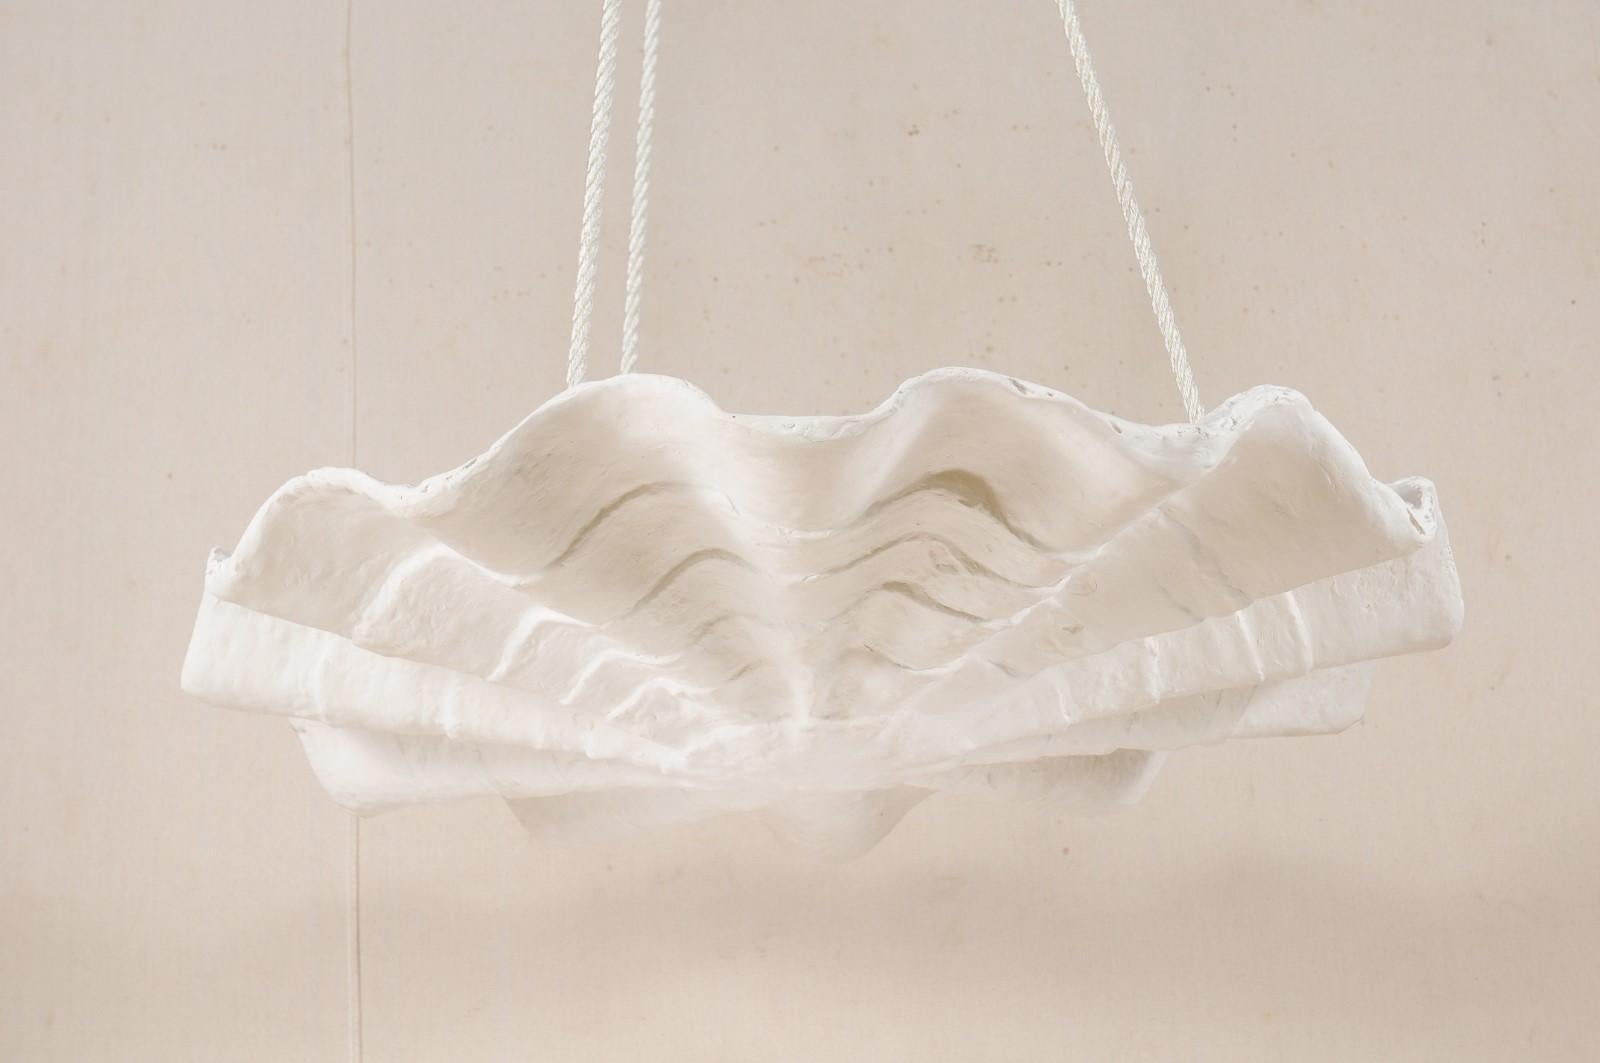 North American Large Midcentury Inspired Artisan Made Suspended Light Fixture, White Color